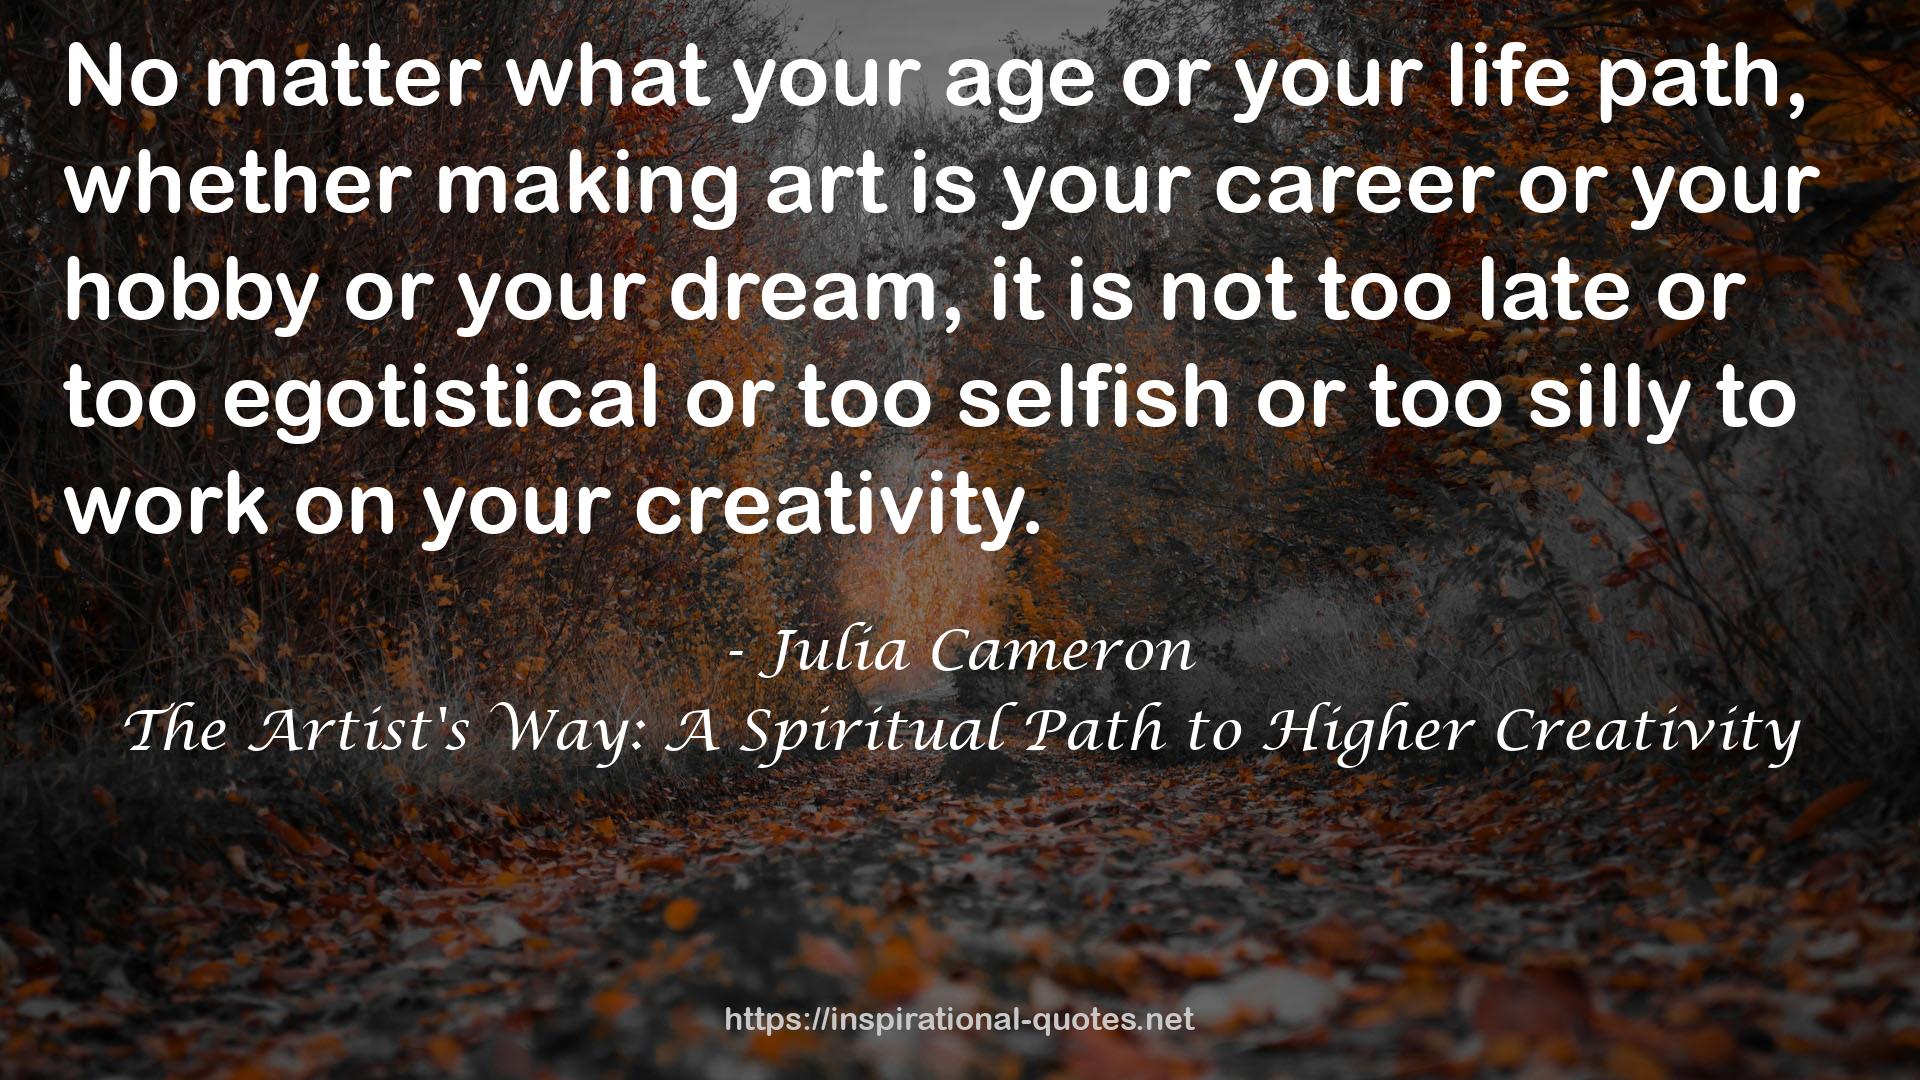 The Artist's Way: A Spiritual Path to Higher Creativity QUOTES